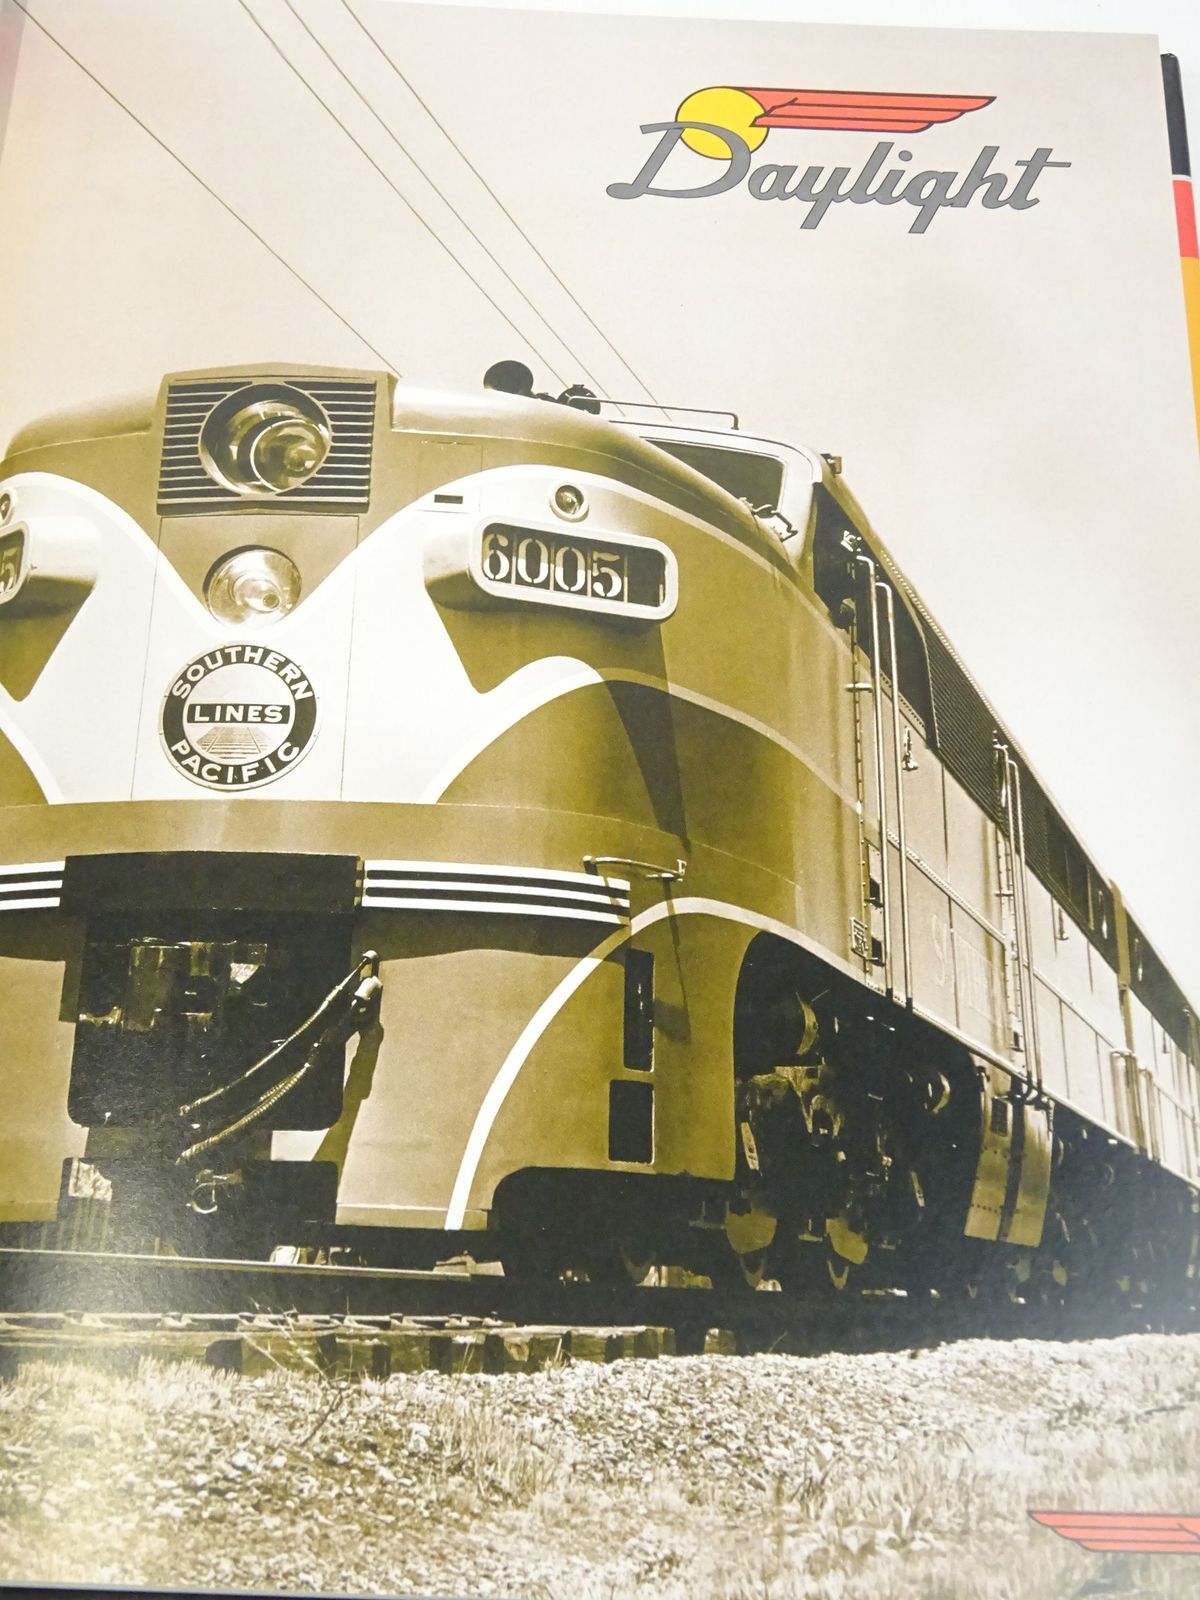 Photo of SOUTHERN PACIFIC PASSENGER TRAIN CONSISTS AND CARS 1955-1958 written by Stegmaier, Harry published by TLC Publishing Inc. (STOCK CODE: 1818078)  for sale by Stella & Rose's Books